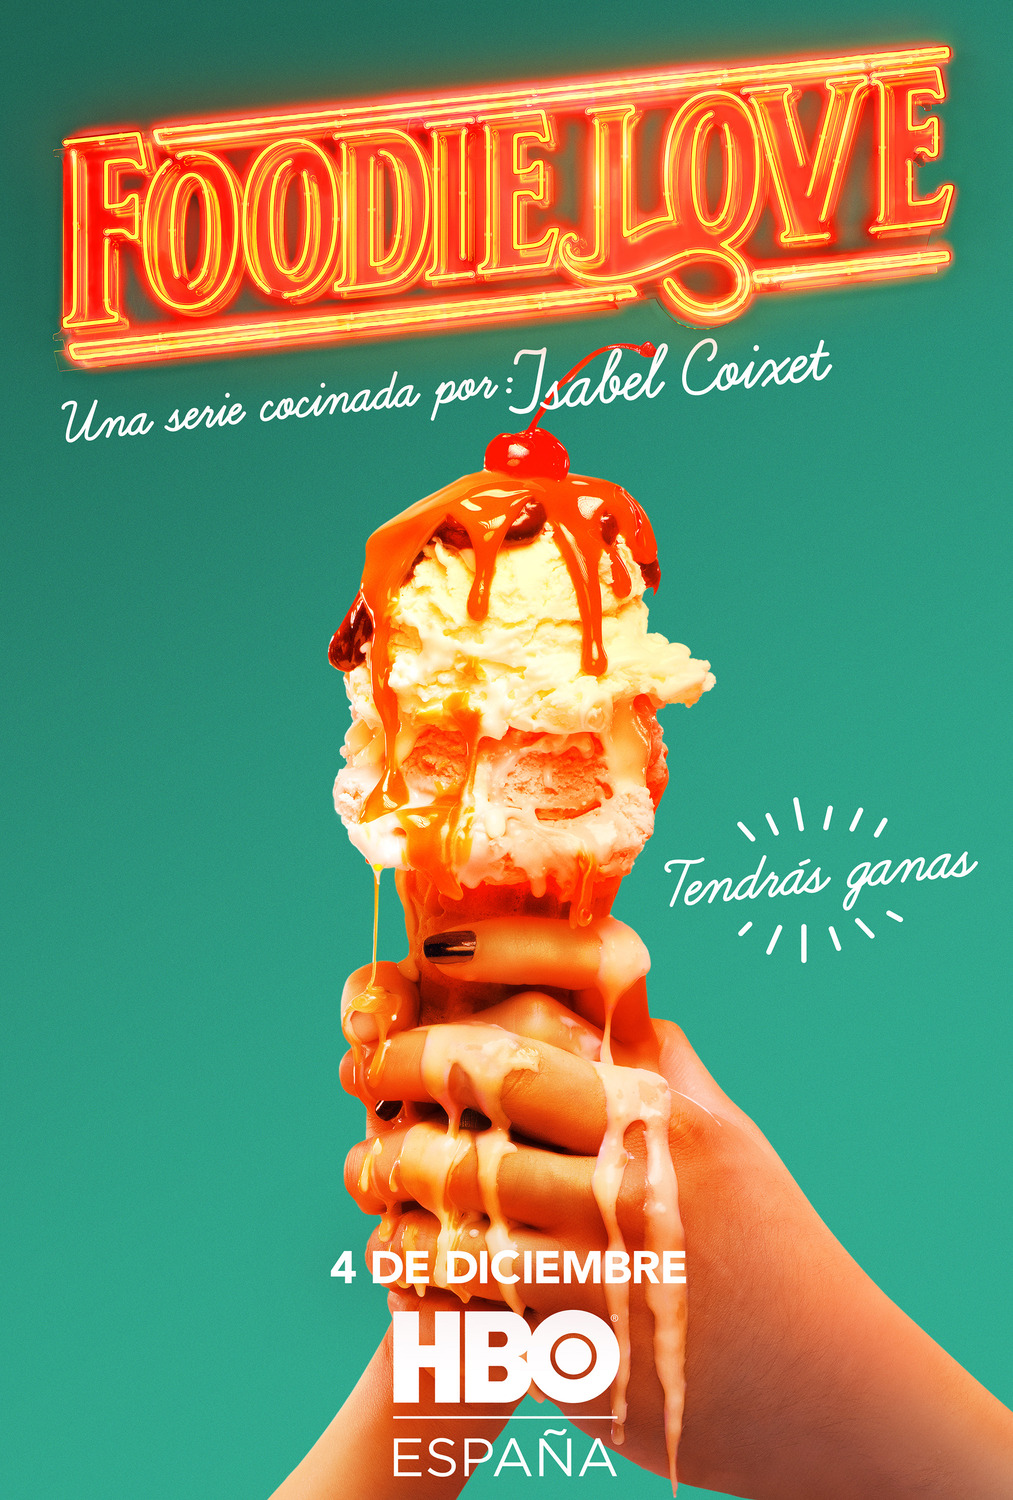 Extra Large TV Poster Image for Foodie Love (#4 of 5)